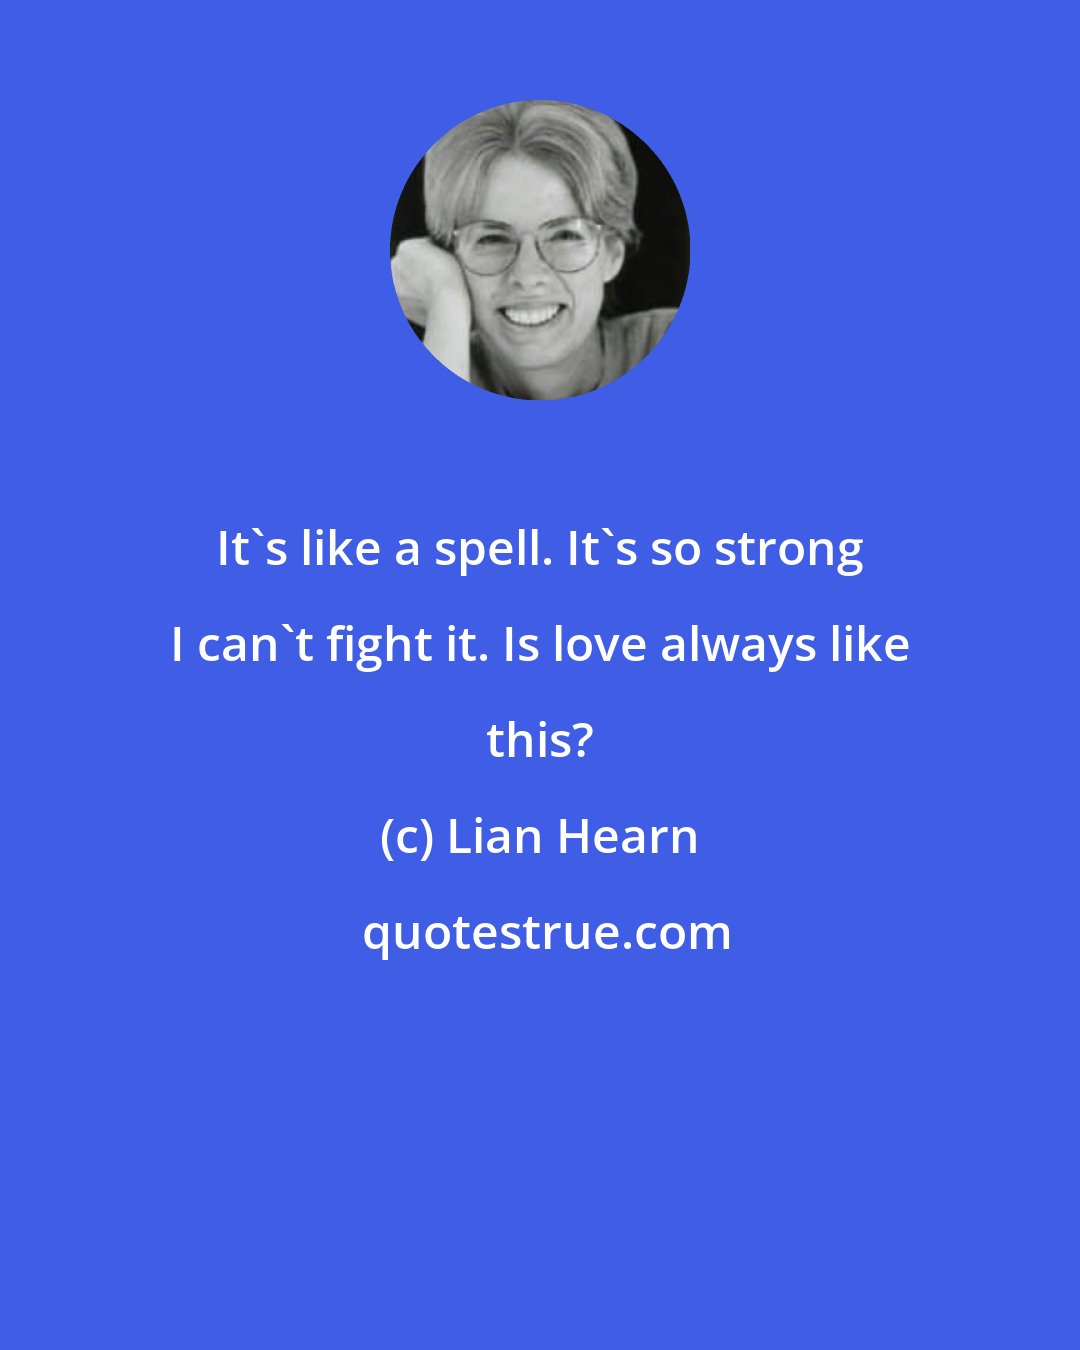 Lian Hearn: It's like a spell. It's so strong I can't fight it. Is love always like this?